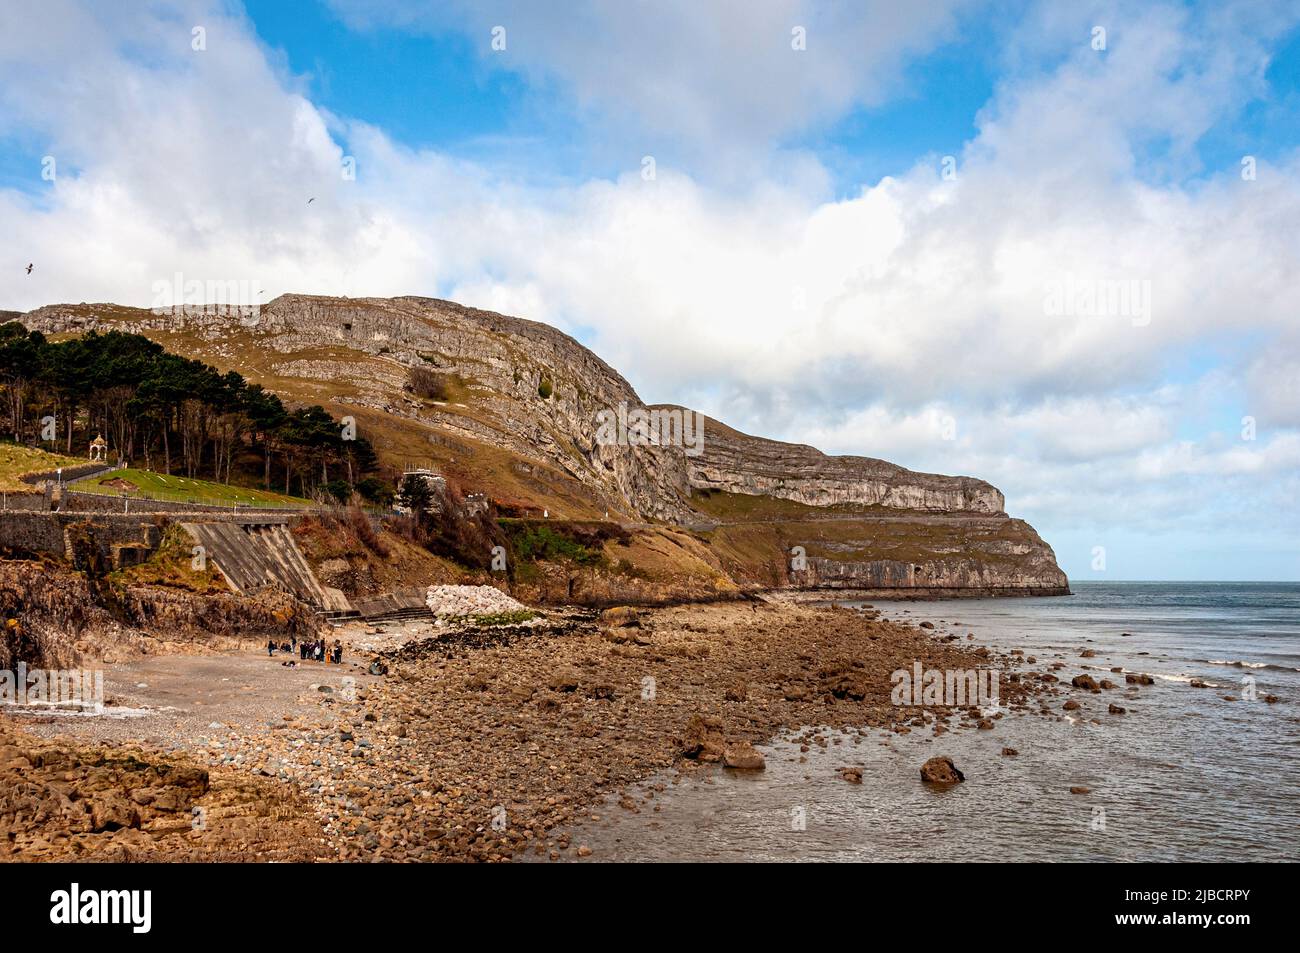 The striking headland of Great Orme jutting into the Irish Sea has landscaped gardens and terraces covering the lower steeply sloping southern sides Stock Photo